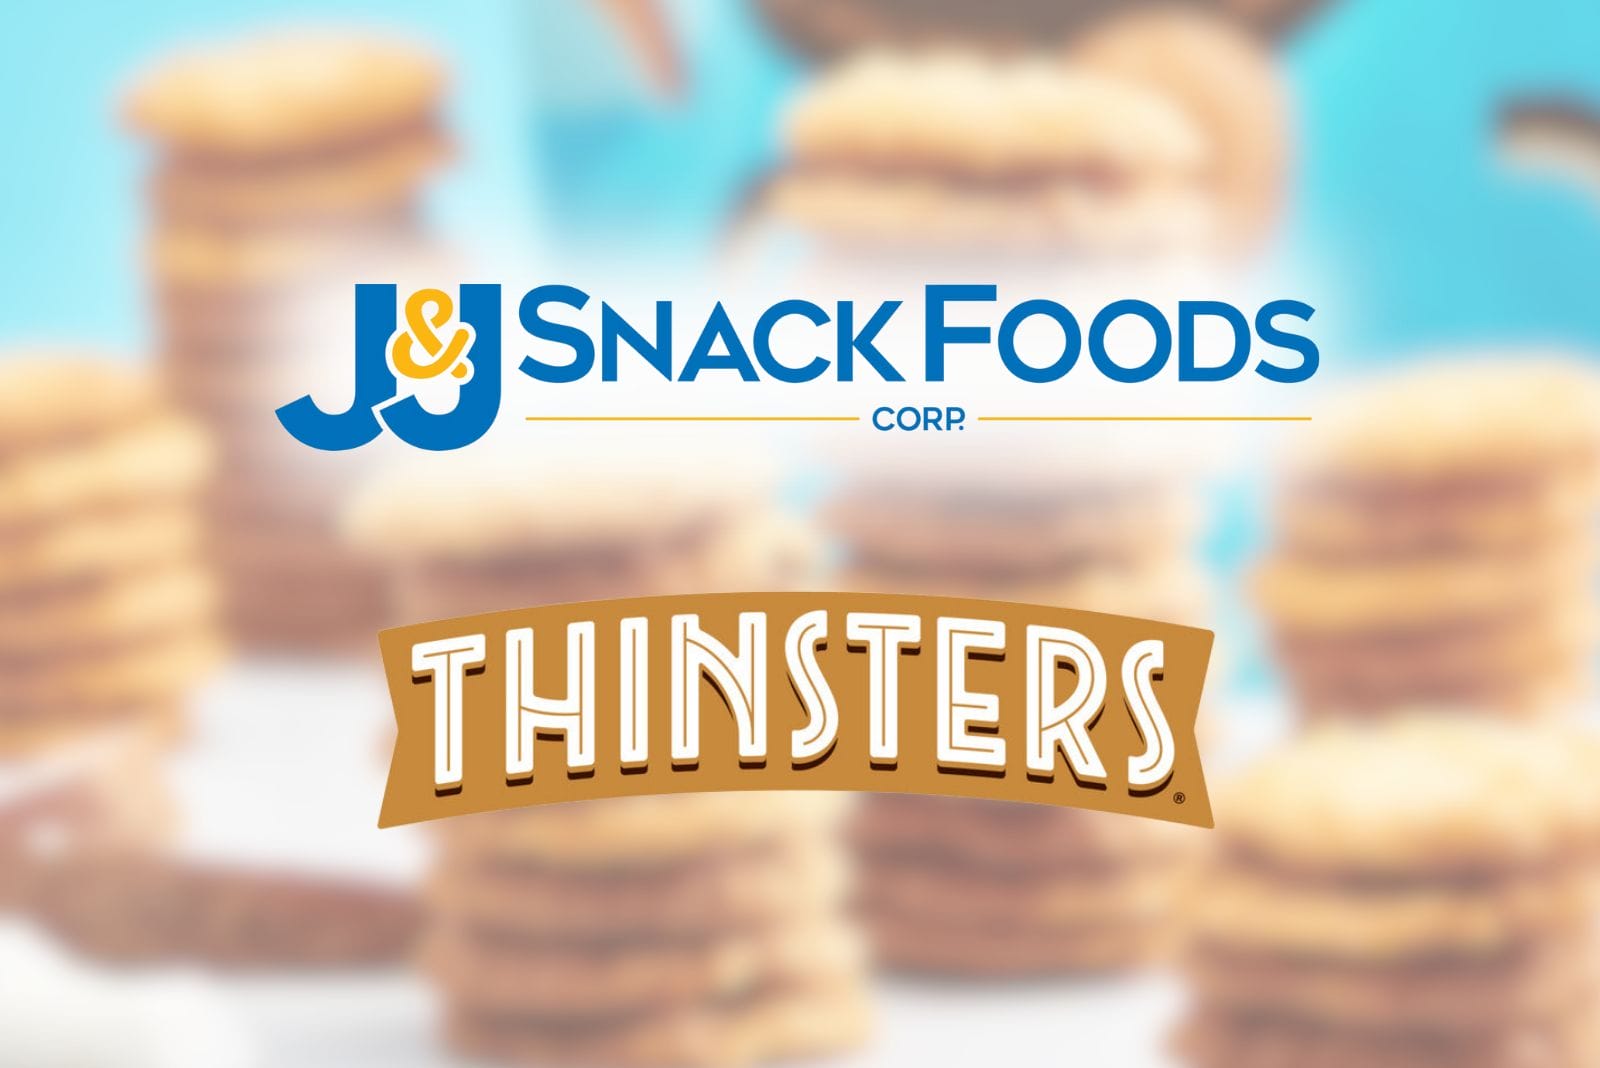 J&J Snack Foods and thinsters logo on top of blurry cookies